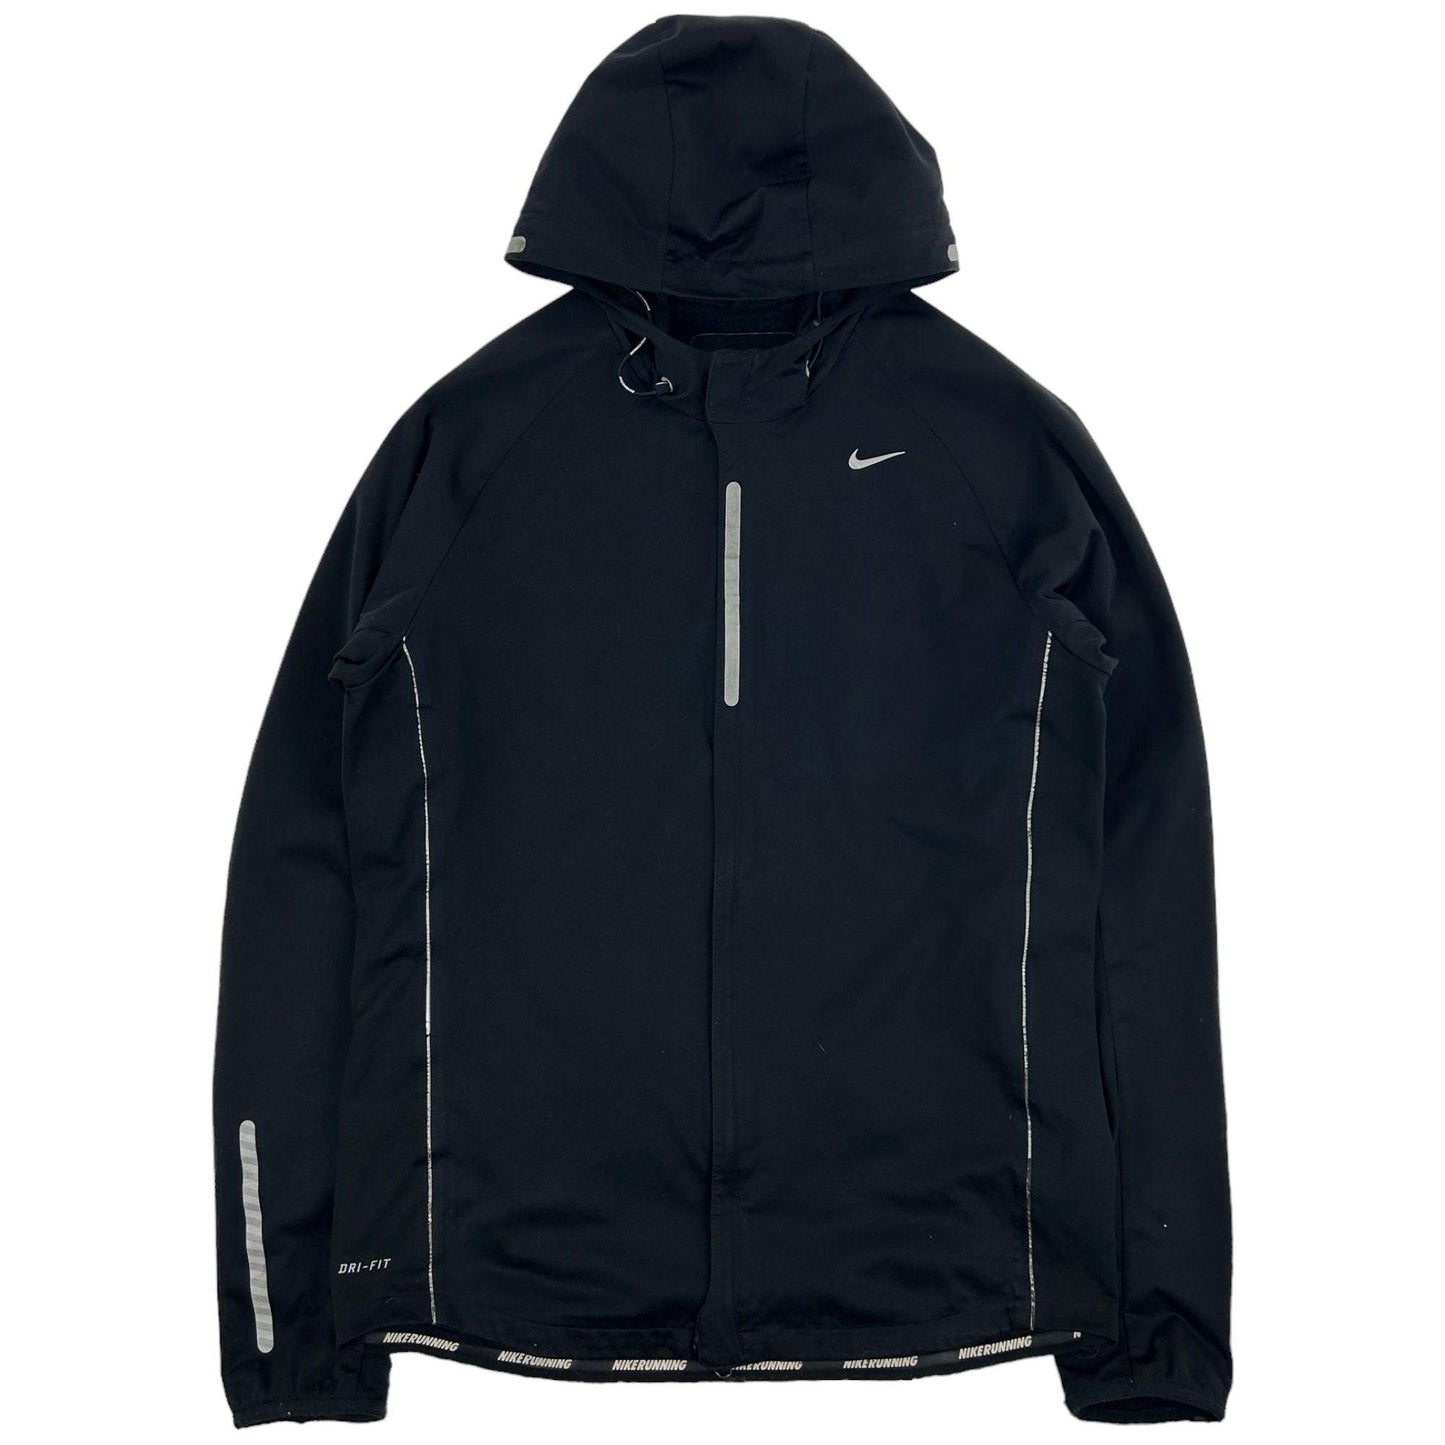 Nike Dri-Fit Running Zip Up Jacket Size M - Known Source